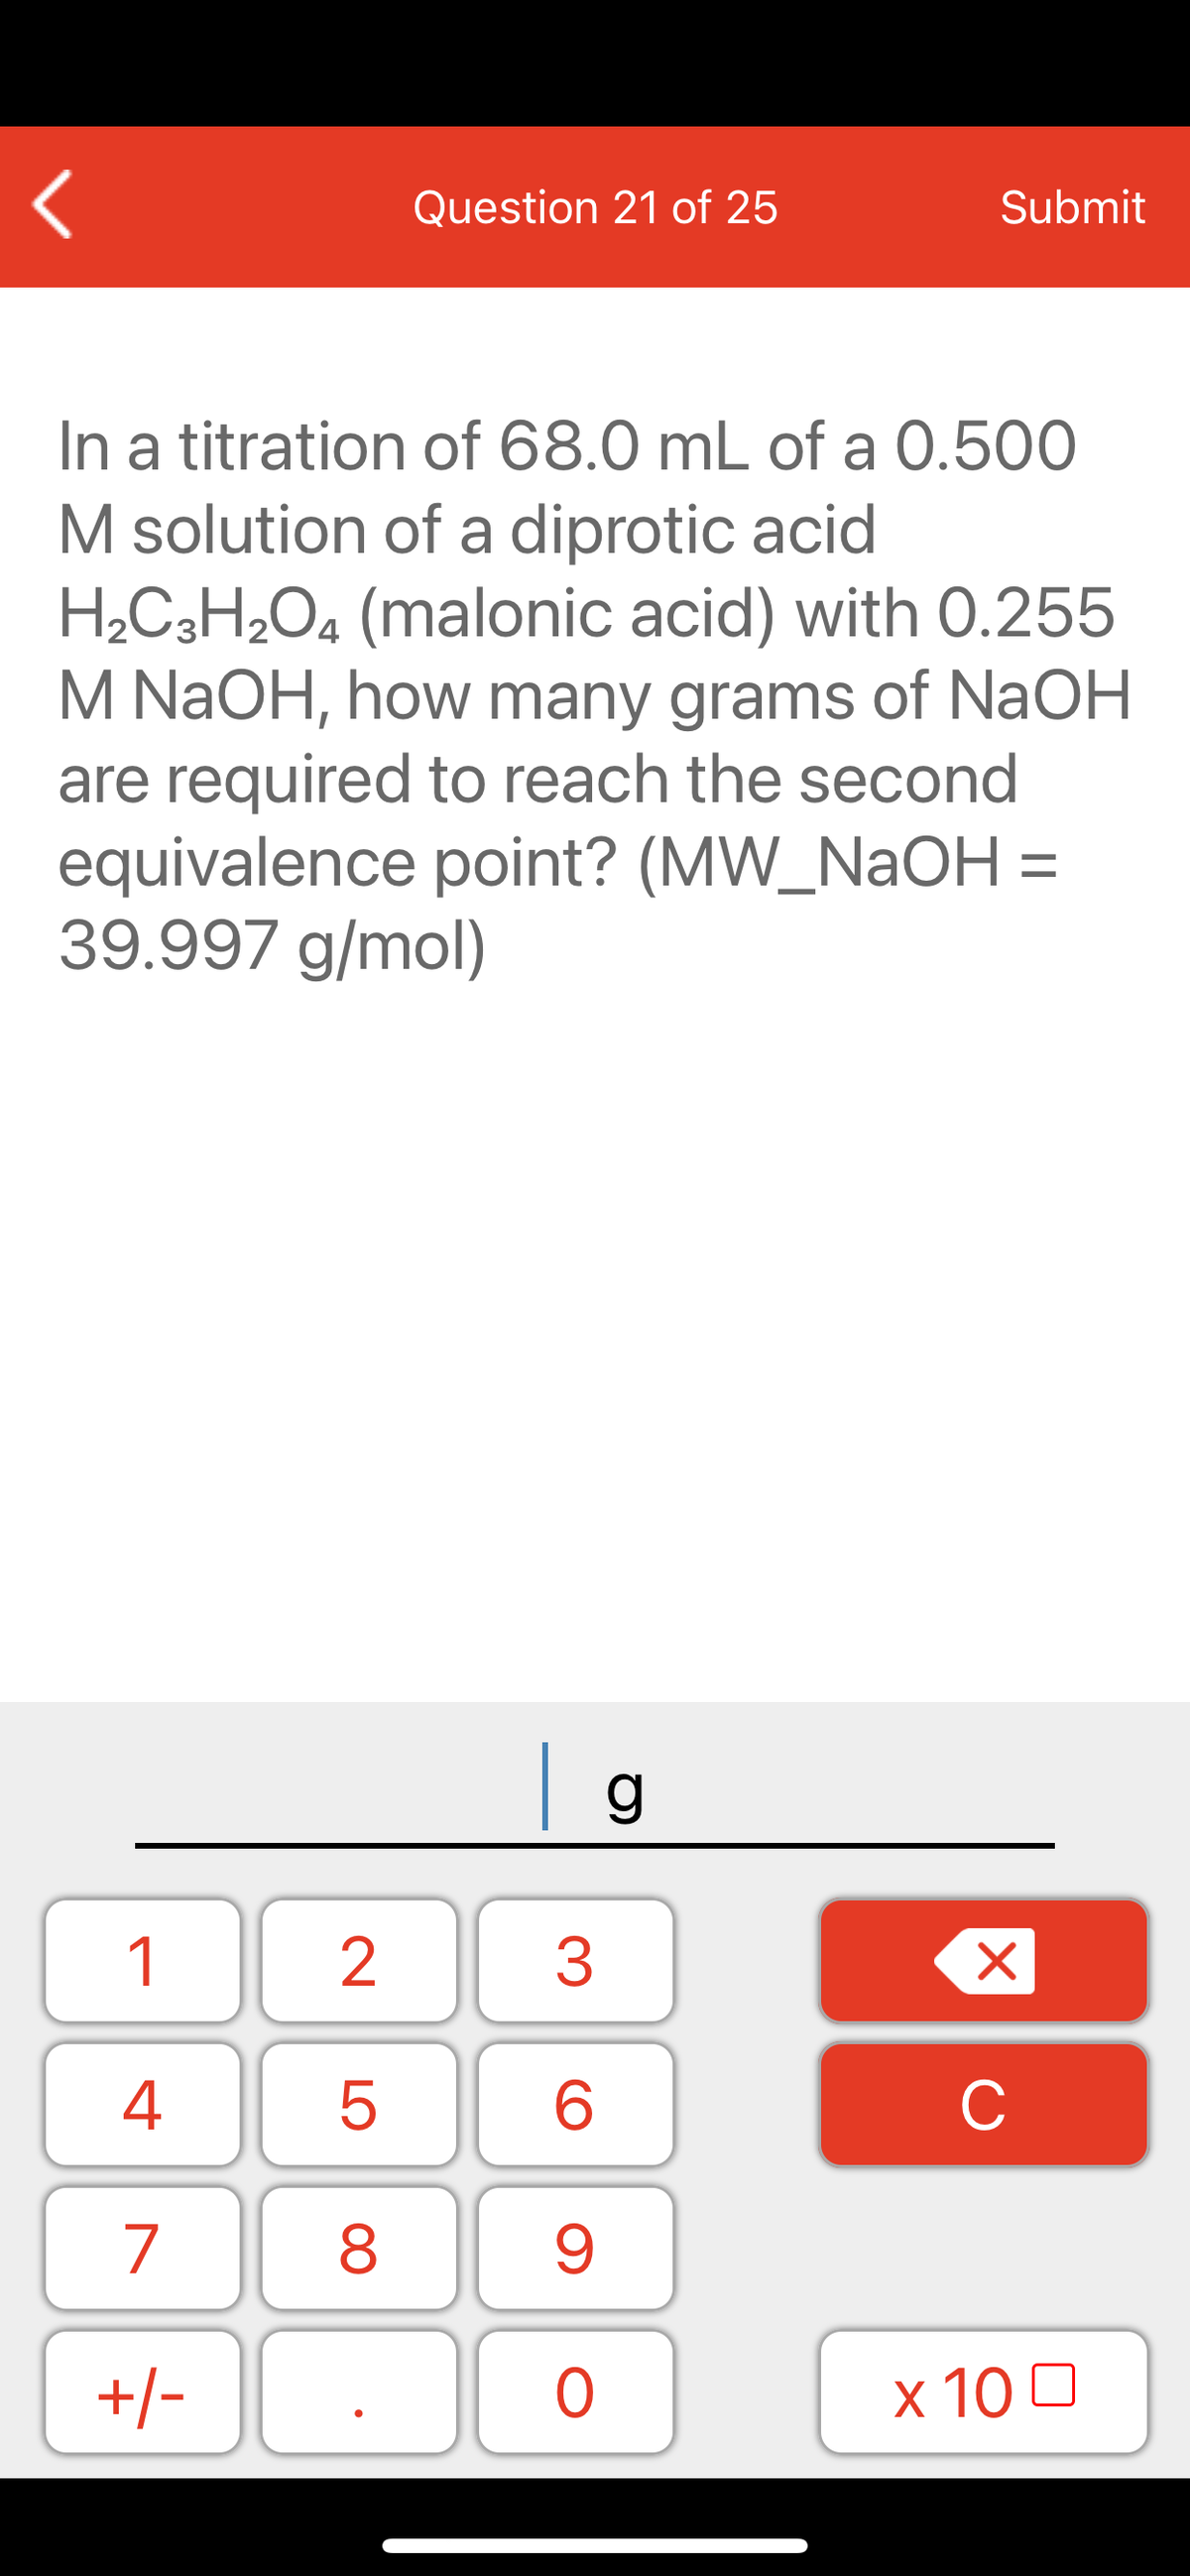 Question 21 of 25
Submit
In a titration of 68.0 mL of a 0.500
M solution of a diprotic acid
H2C3H2O4 (malonic acid) with 0.255
M NAOH, how many grams of NaOH
are required to reach the second
equivalence point? (MW_NAOH =
39.997 g/mol)
| g
1
2
3
C
7
9.
+/-
x 10 0
LO
00
